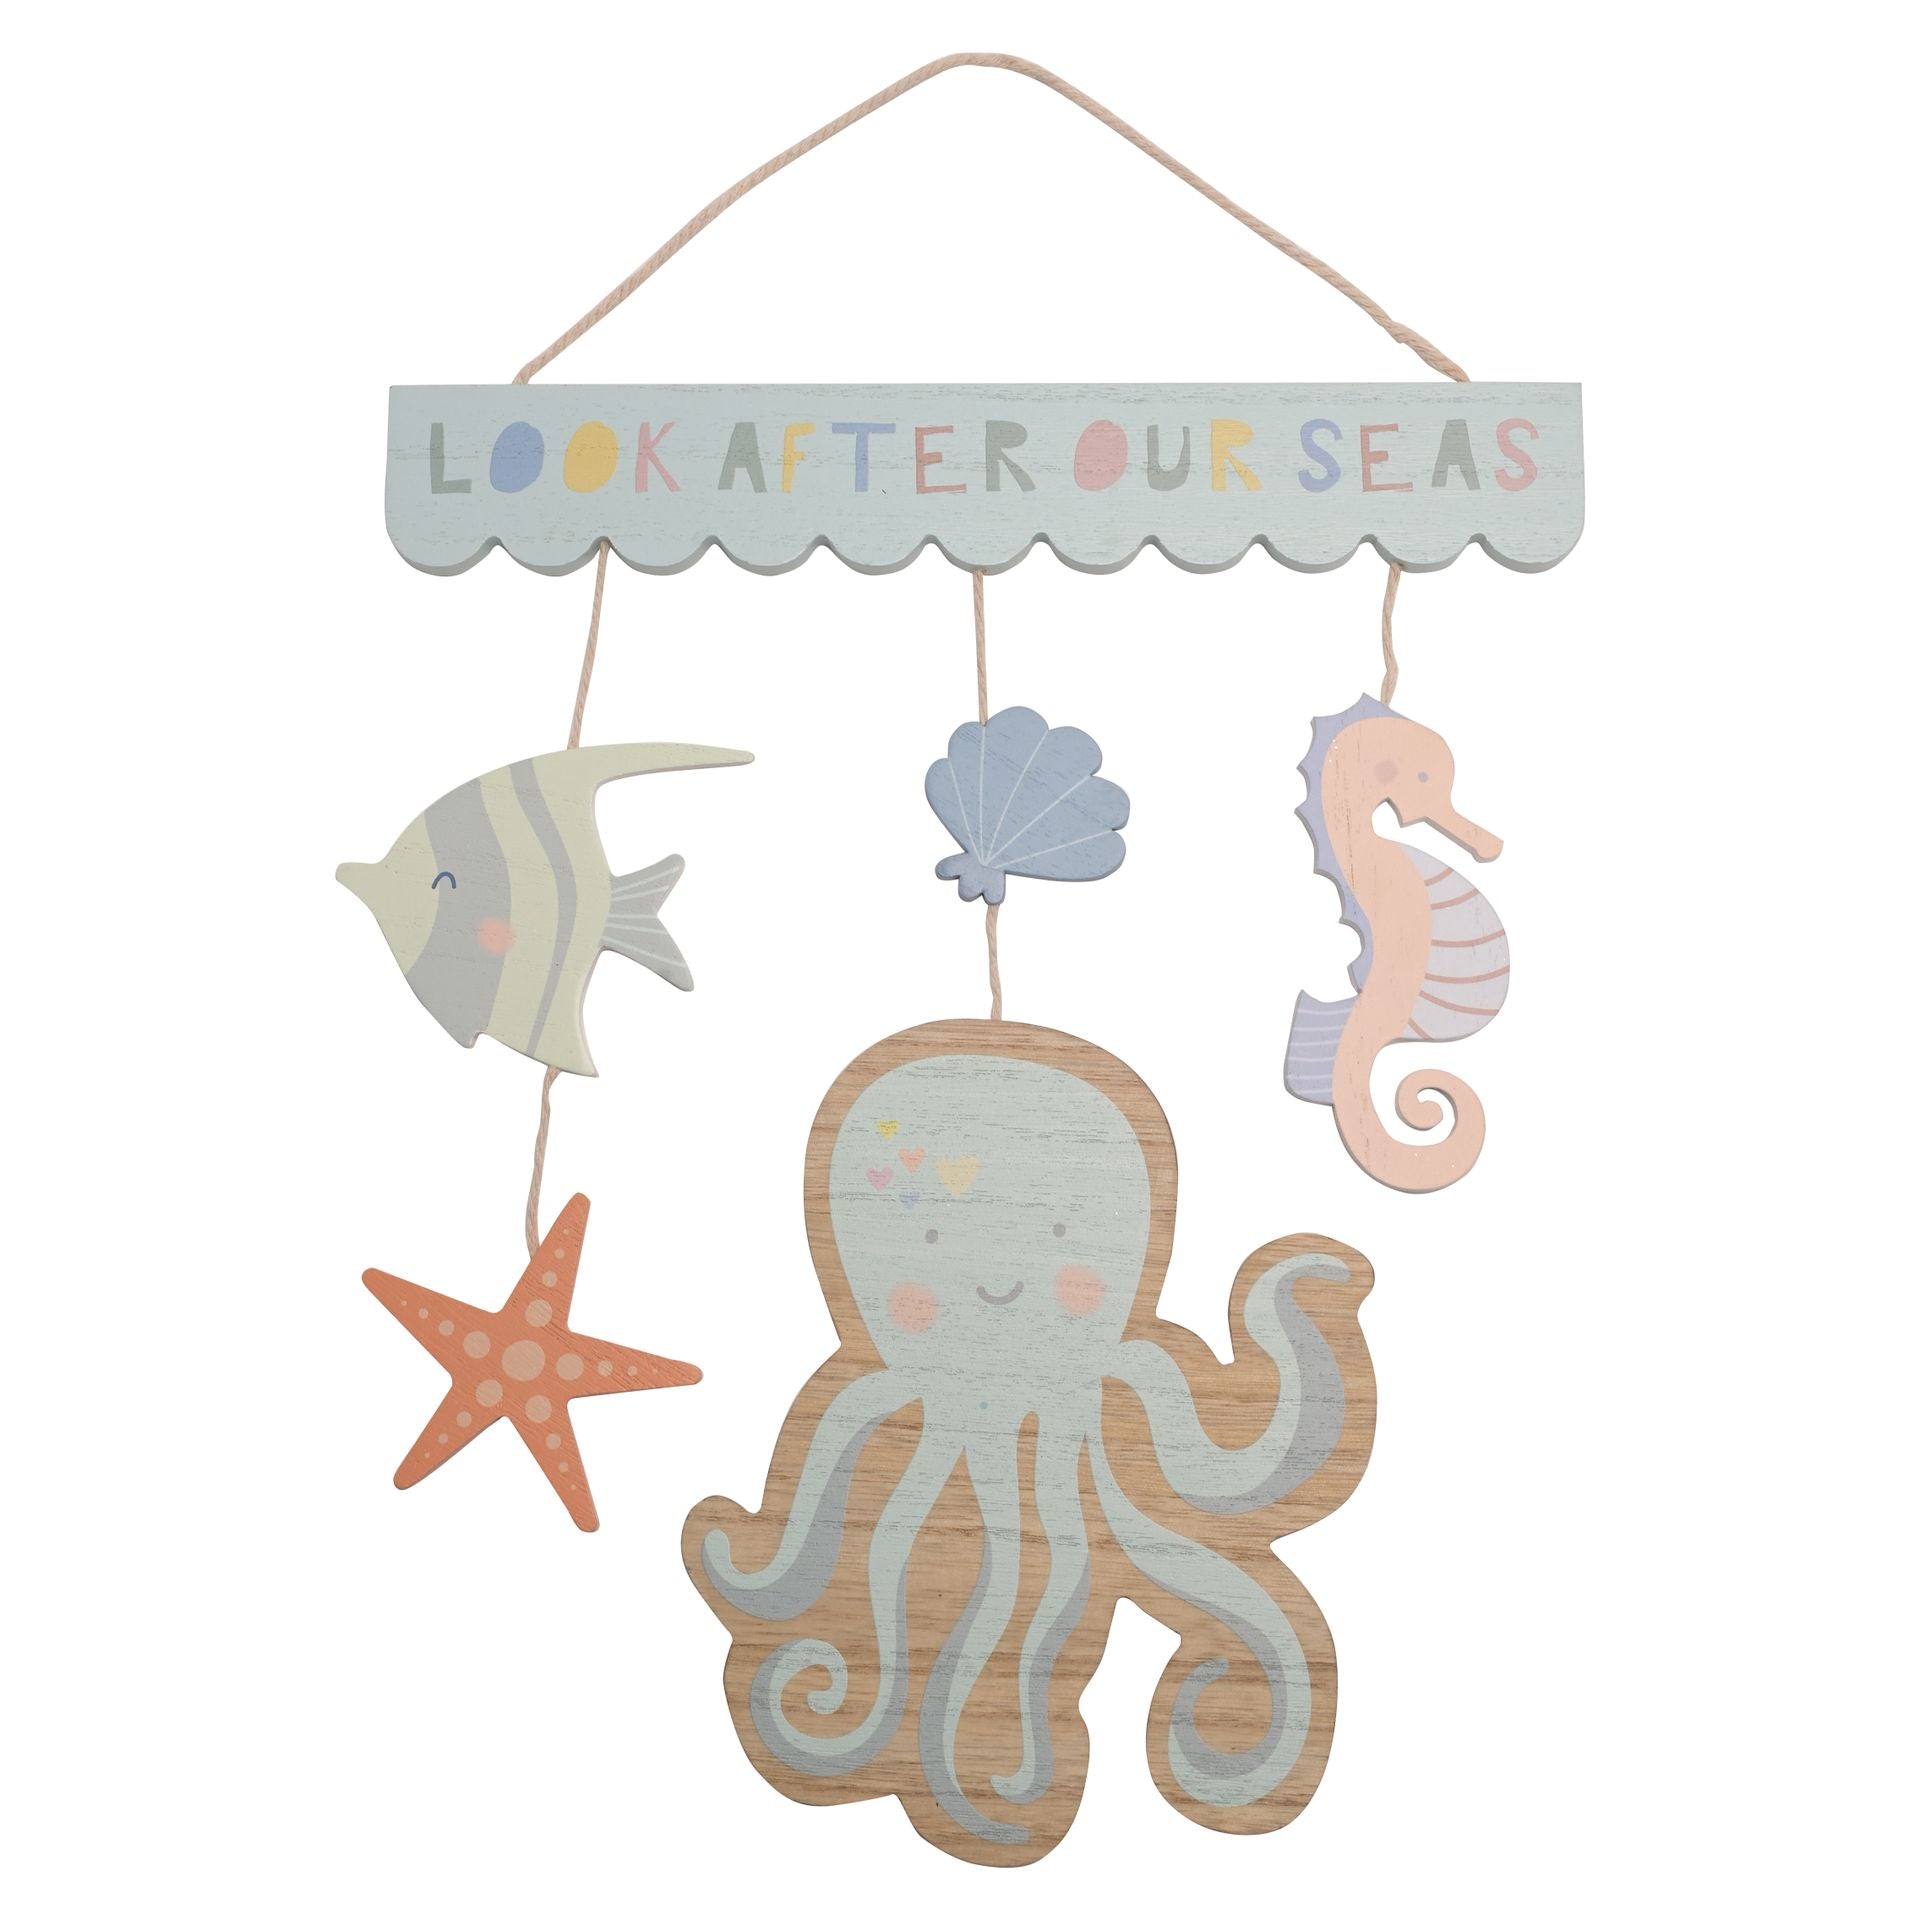 This adorable hanging plaque provides both inspiration and decoration for children’s bedrooms. The blue, rectangular wooden hanger showcases a colourful ‘Look After Our Seas’ title, from which hangs a series of wooden sea creatures, including an octopus and seahorse